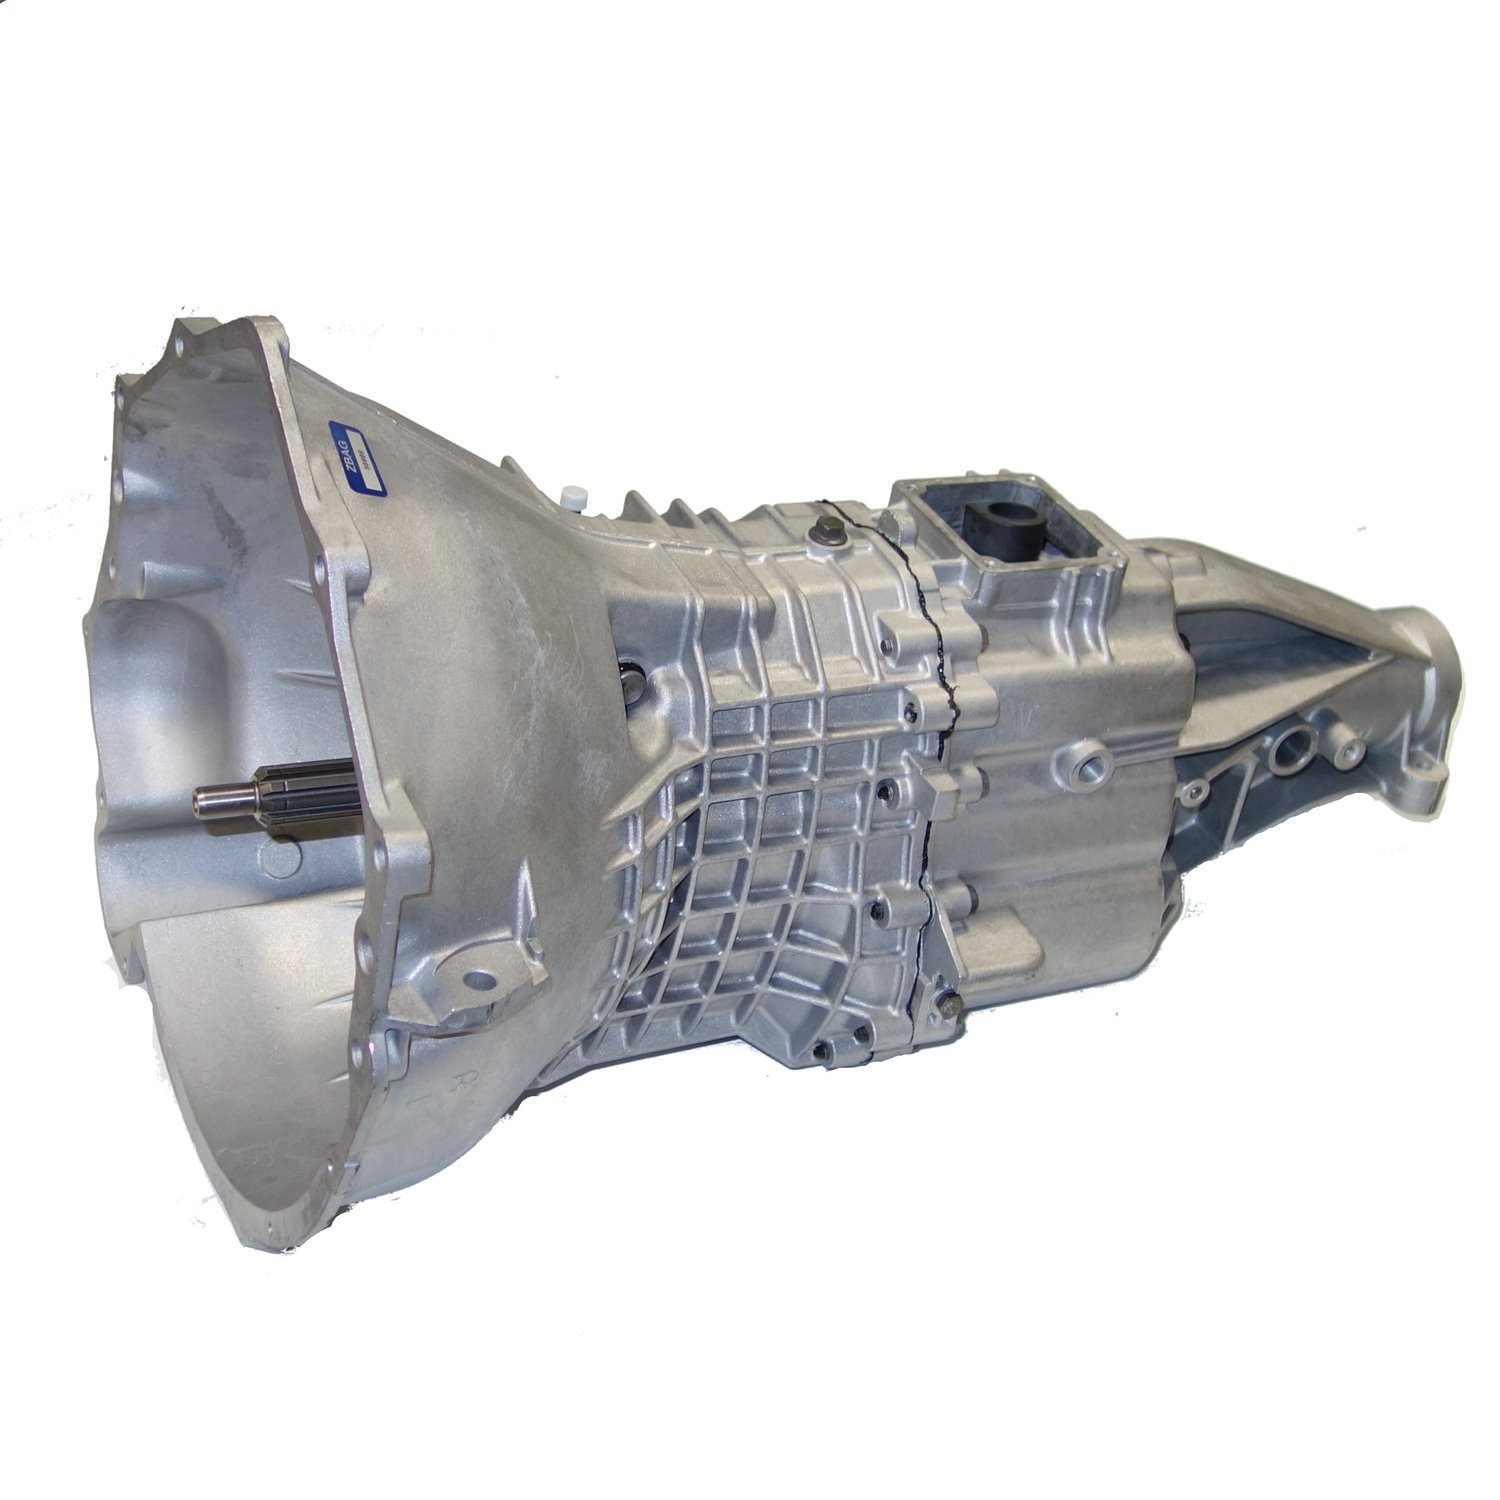 Remanufactured NV3500 Manual Transmission for GM 93-95 S10, S15 & Sonoma, 4.3L, 2WD, 5 Speed